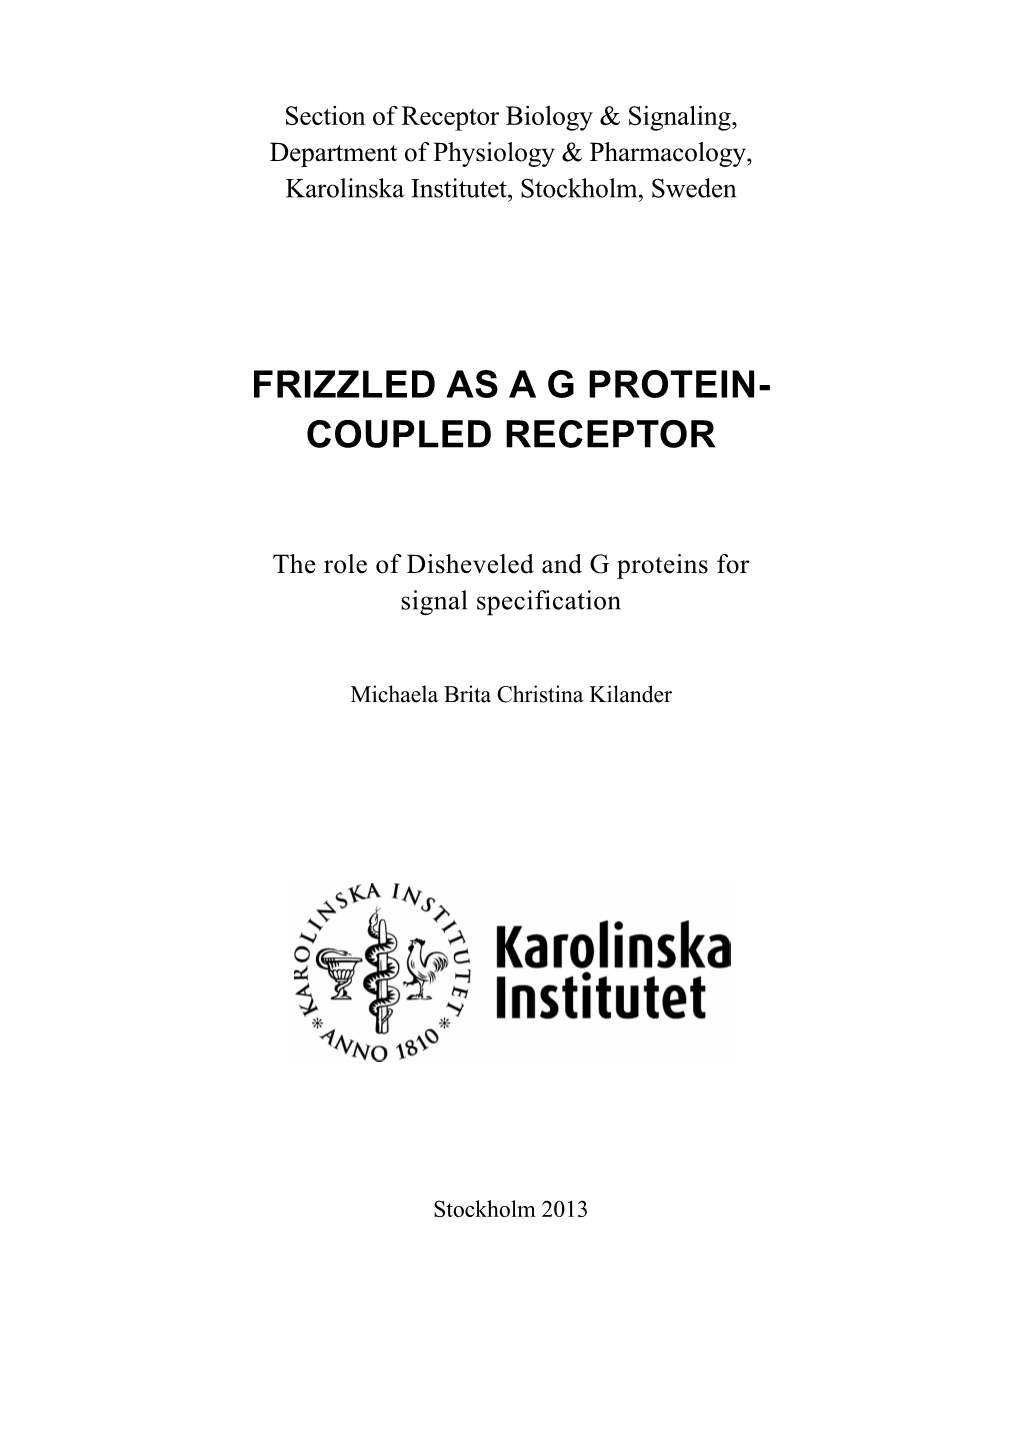 Frizzled As a G Protein- Coupled Receptor